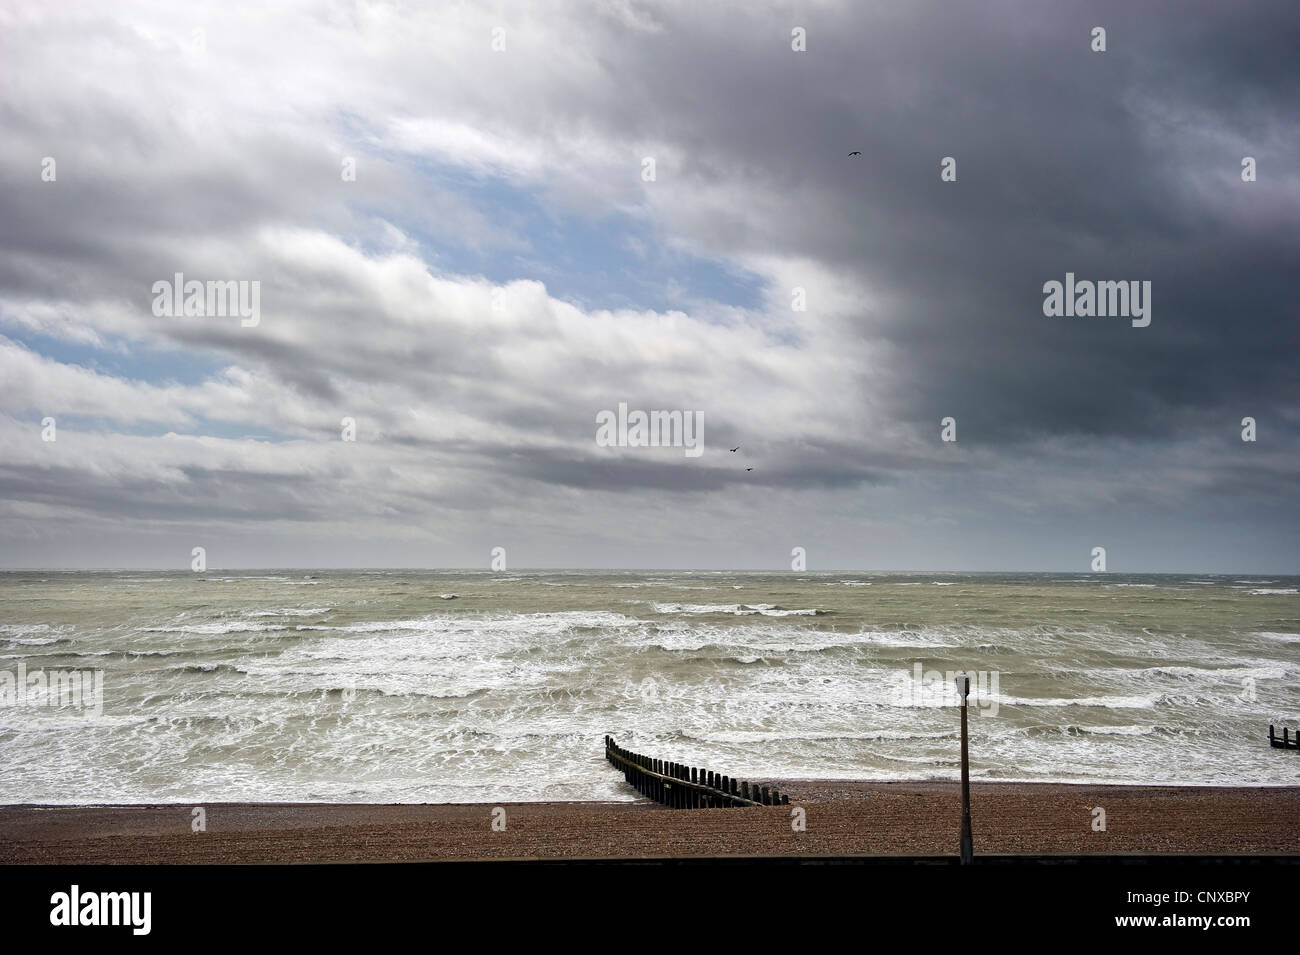 Rough, stormy English Channel sea at Worthing, West Sussex, UK Stock Photo